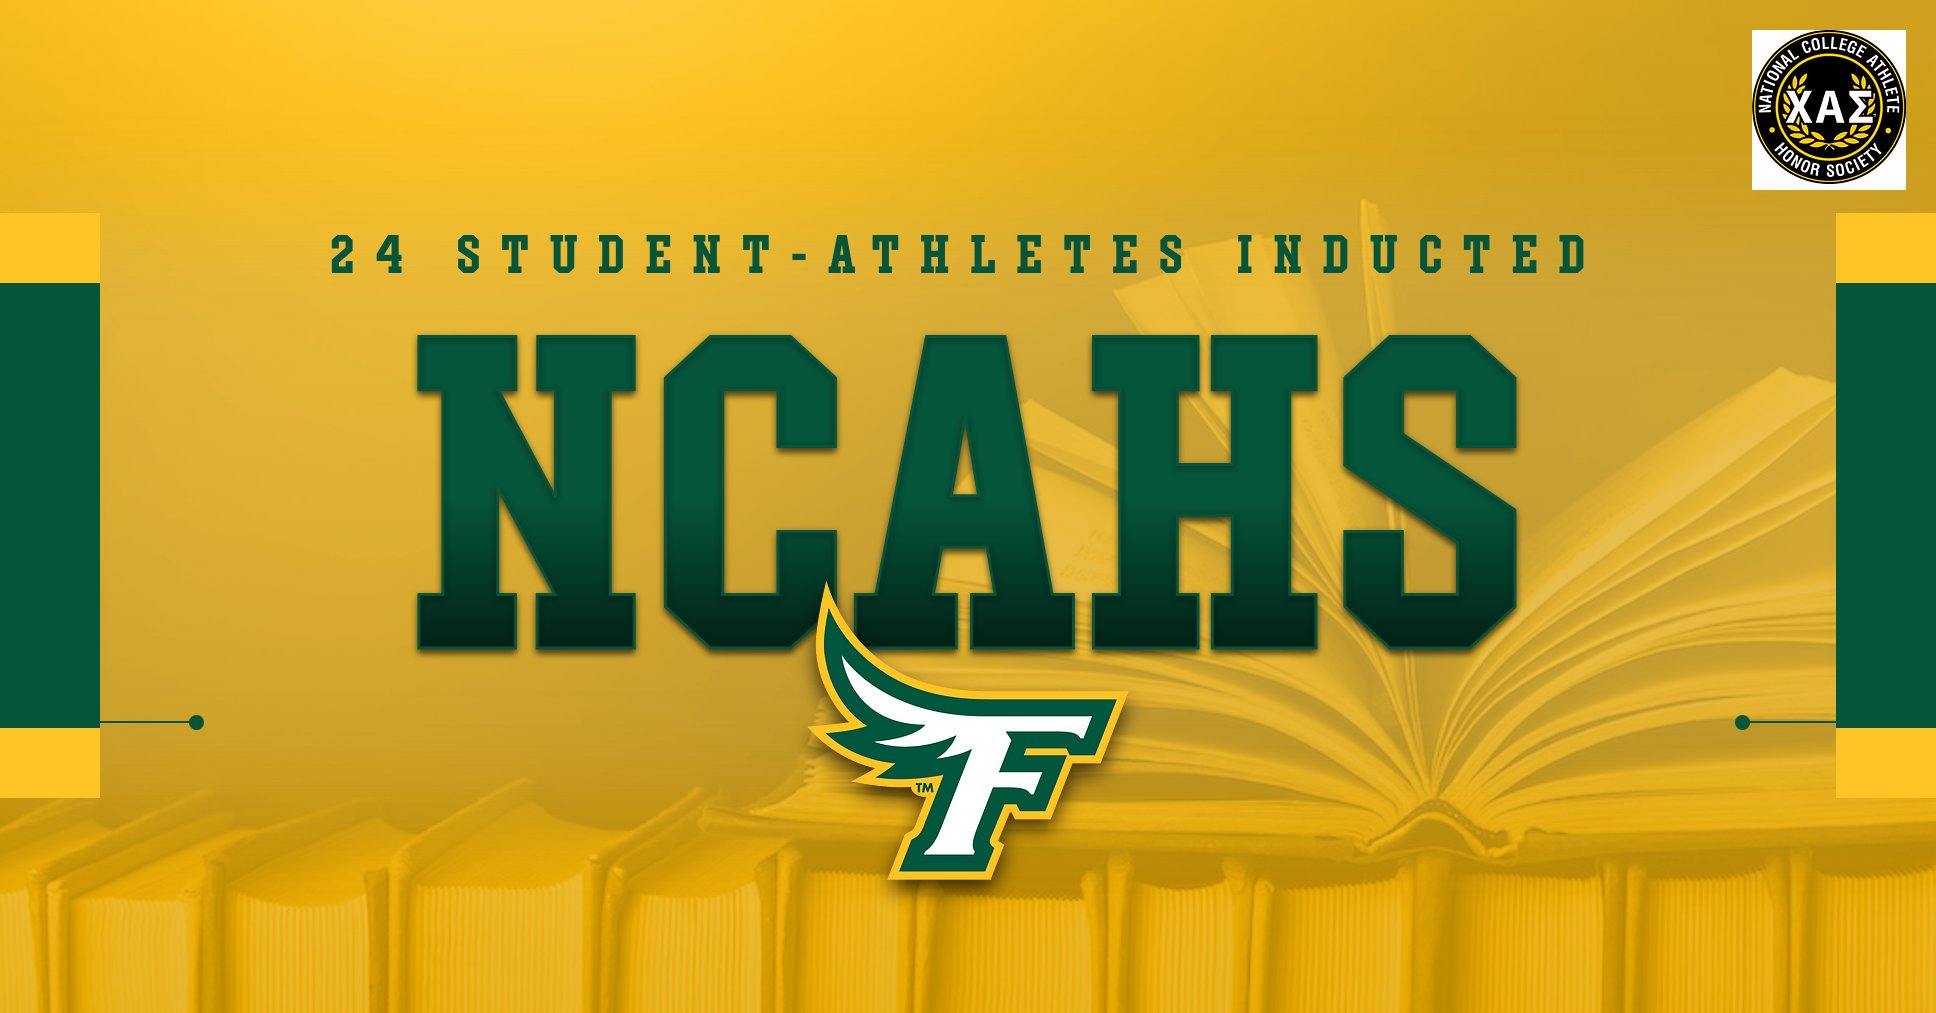 24 Student-Athletes Inducted